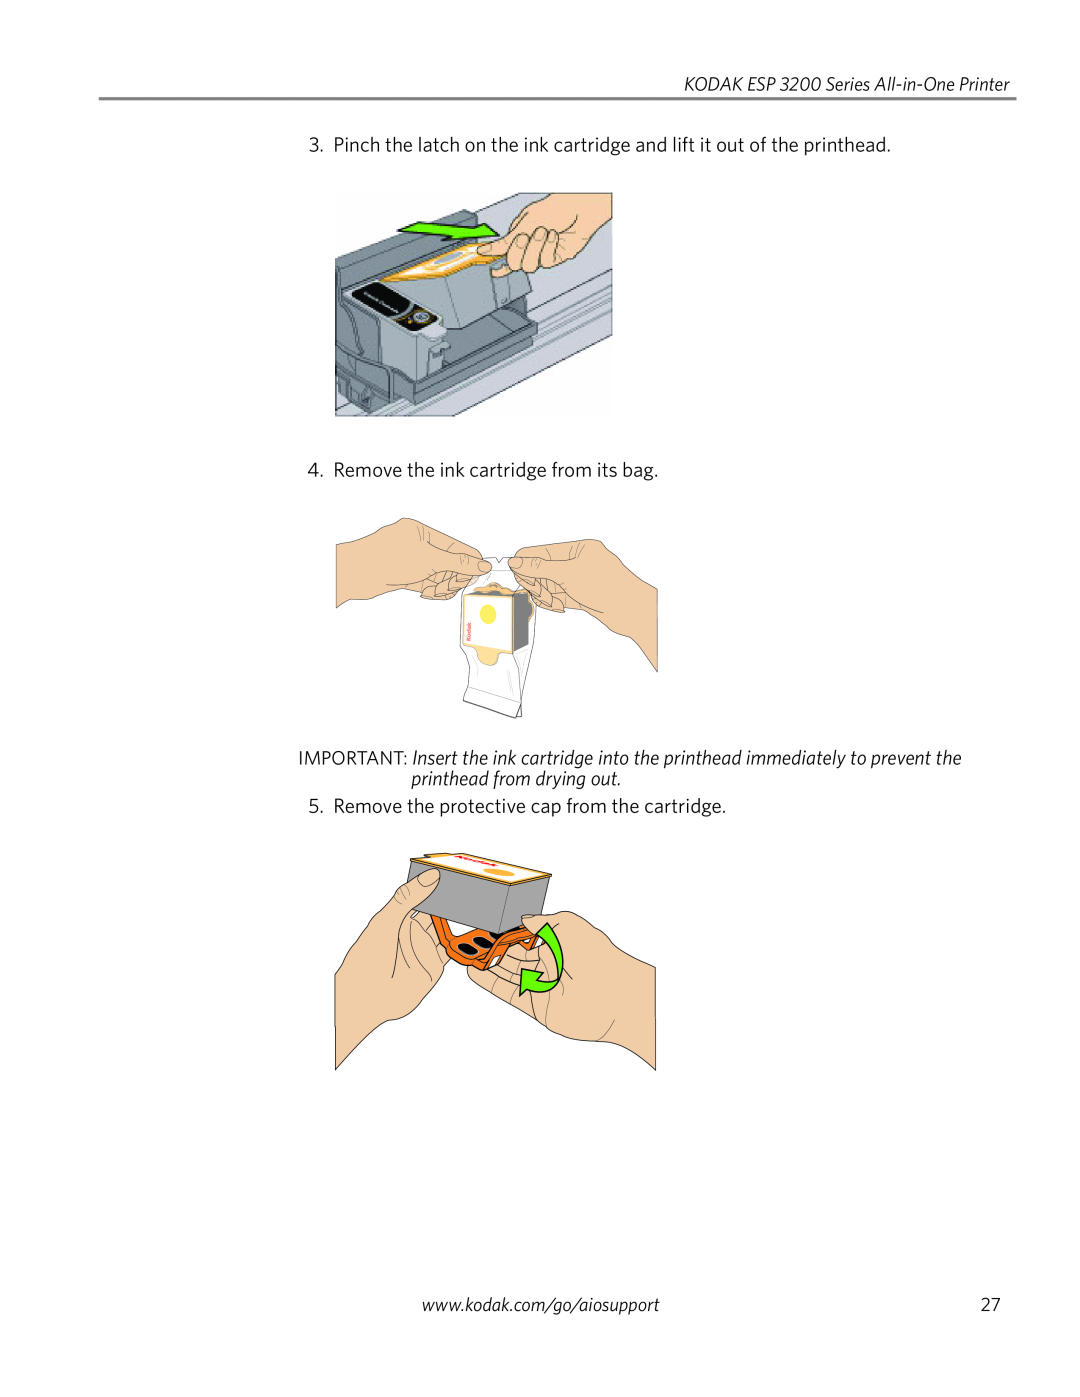 Kodak ESP 3260, ESP 3200 Series manual Remove the ink cartridge from its bag, Remove the protective cap from the cartridge 